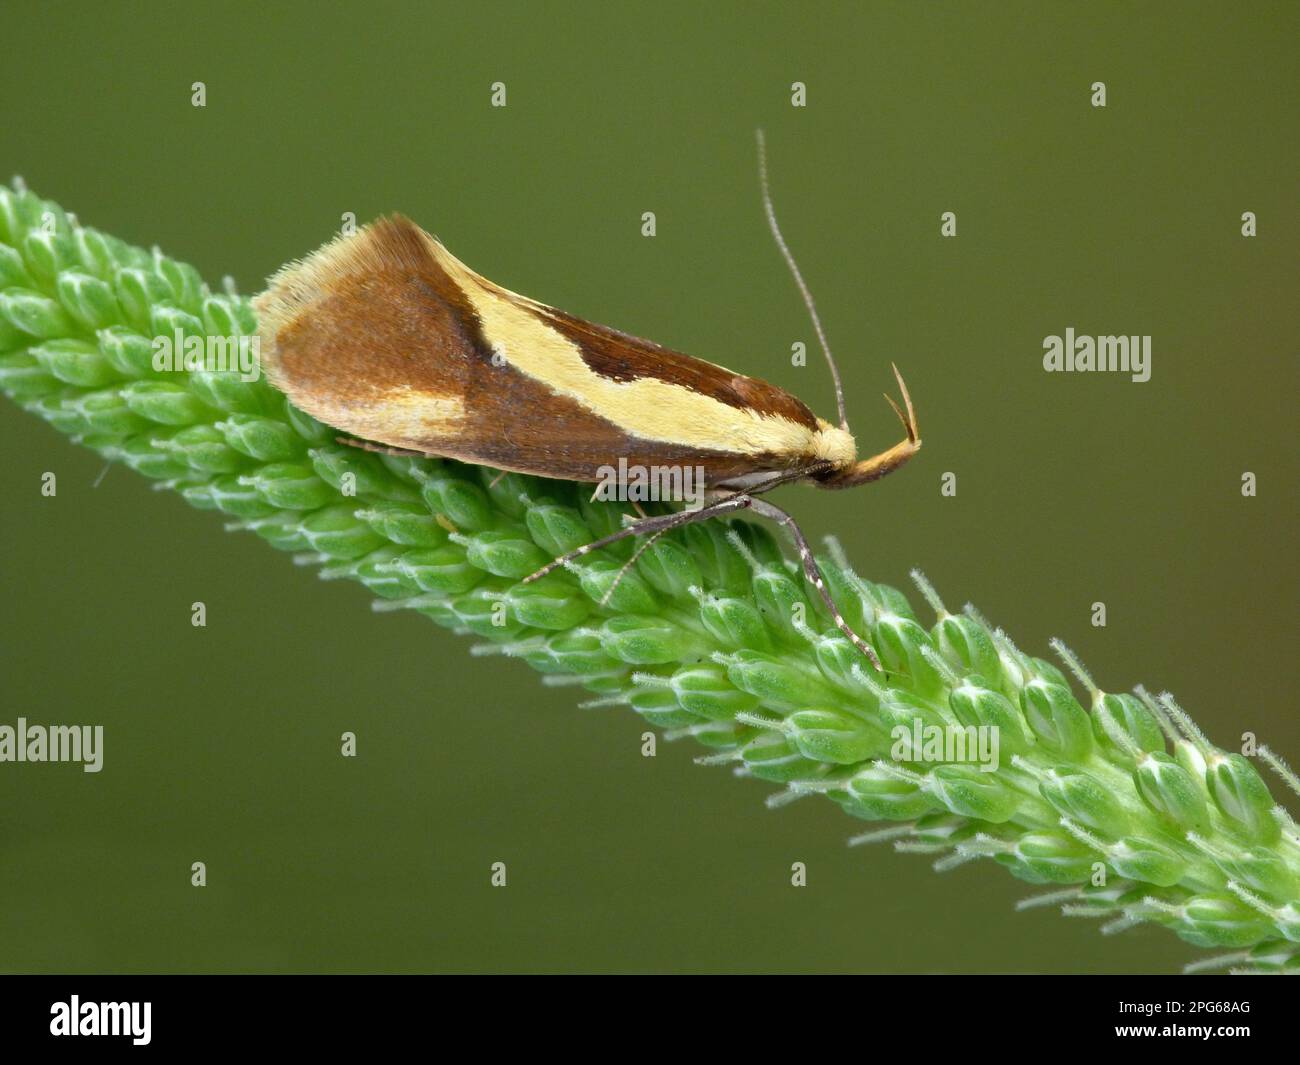 https://c8.alamy.com/comp/2PG68AG/large-gypsy-moth-harpella-forficella-adult-resting-on-the-inflorescence-of-the-large-broad-leaved-plantain-plantago-major-cannobina-valley-2PG68AG.jpg